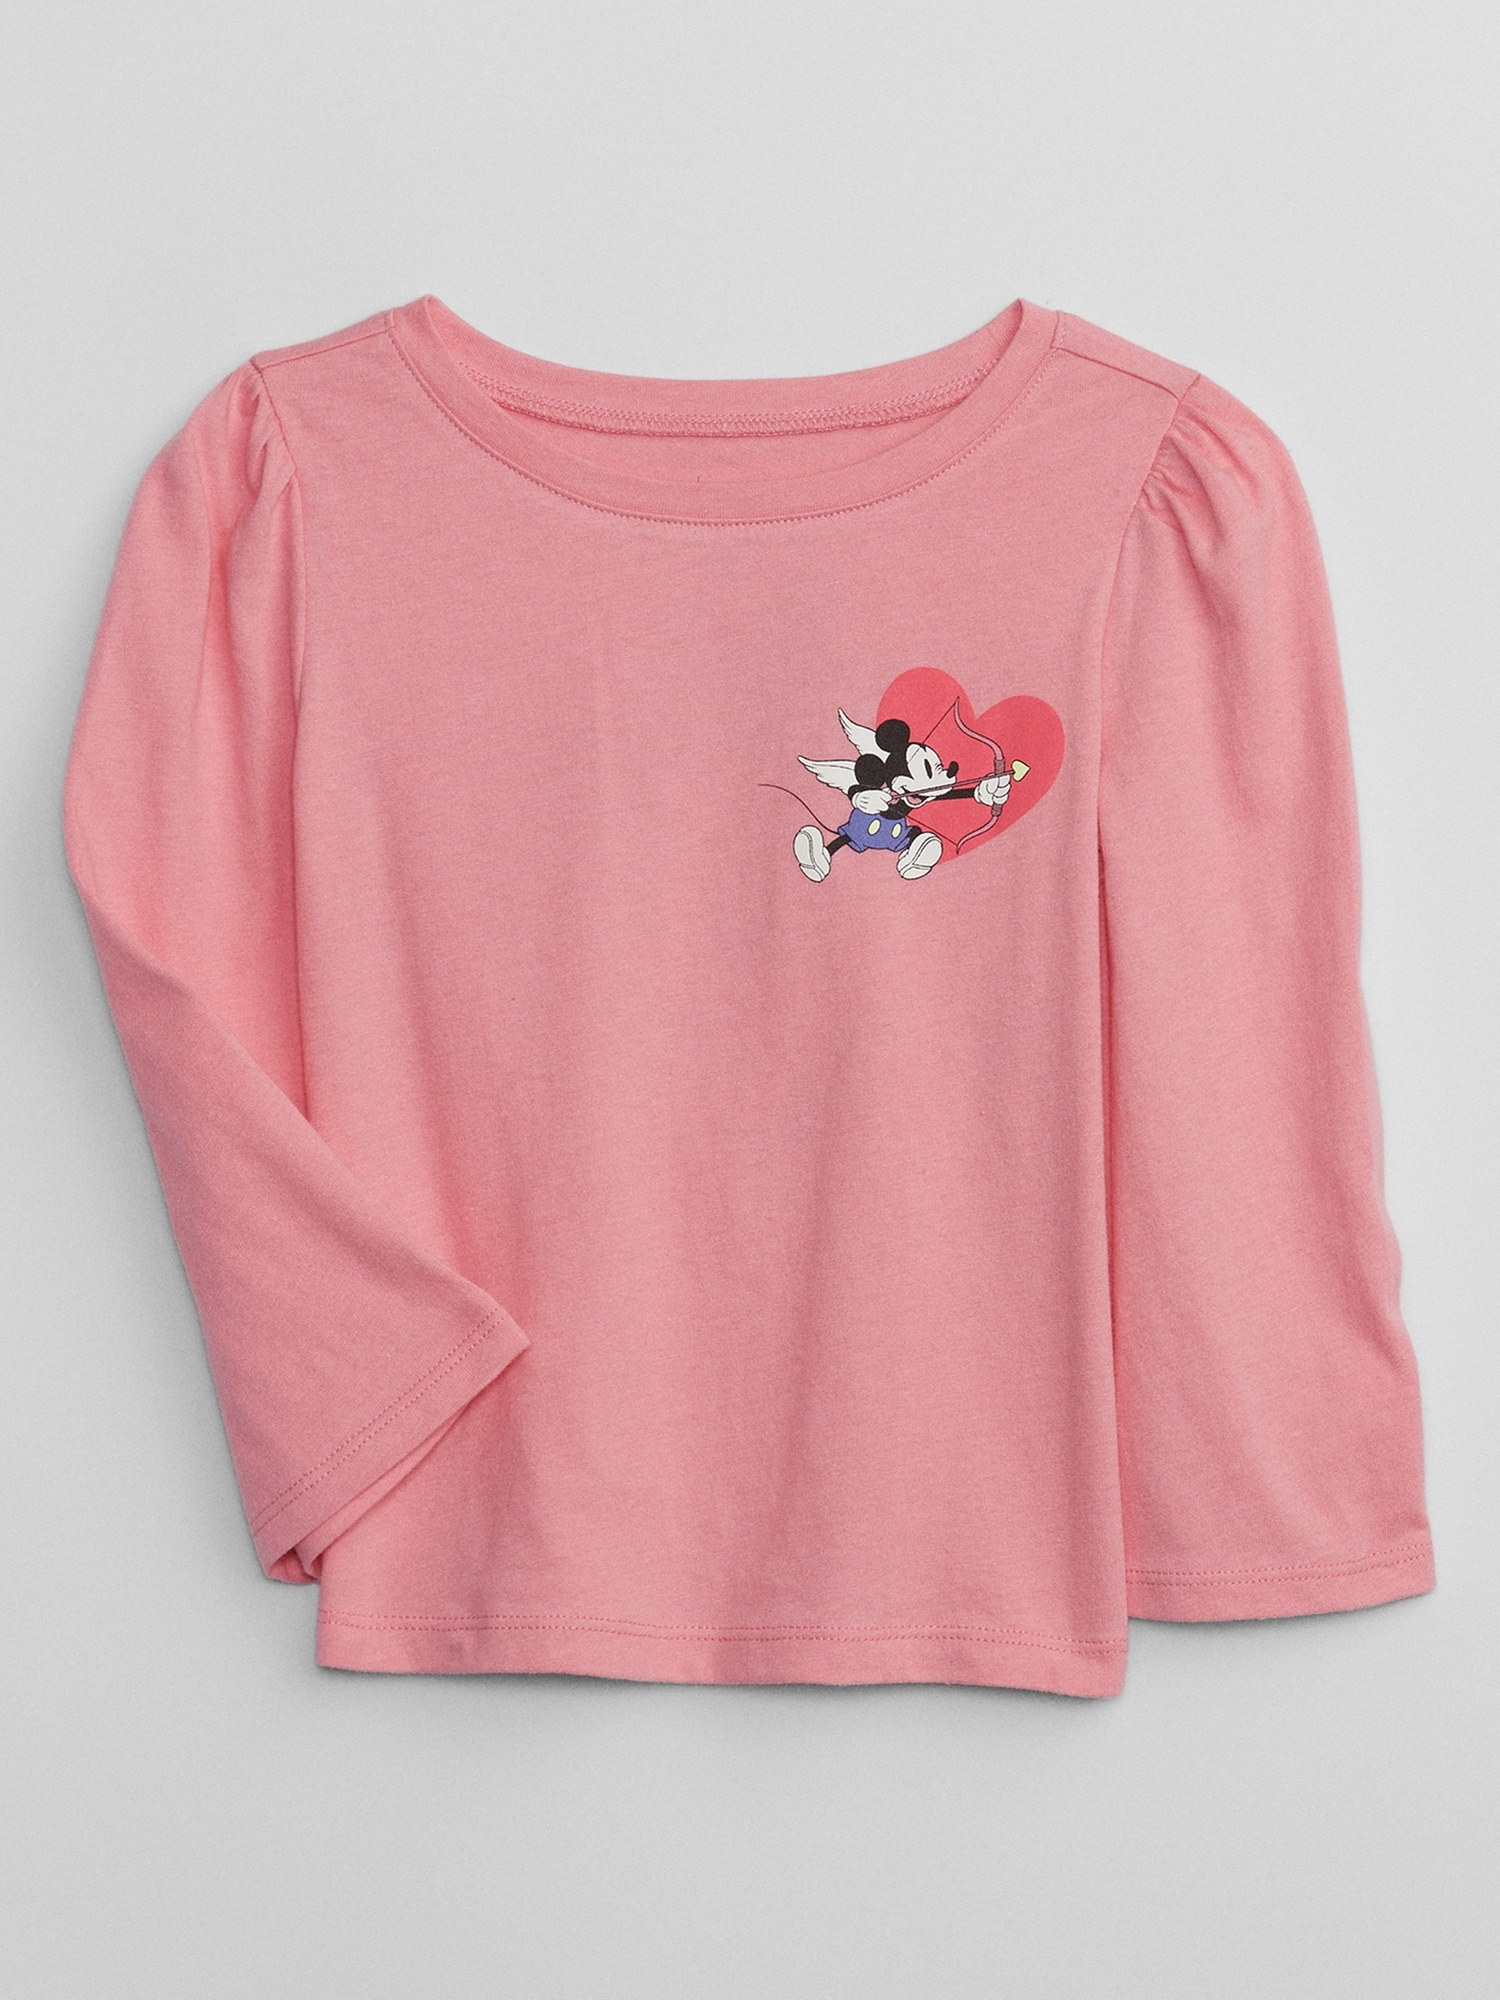 babyGap | Disney Mickey Mouse and Minnie Mouse Graphic T-Shirt